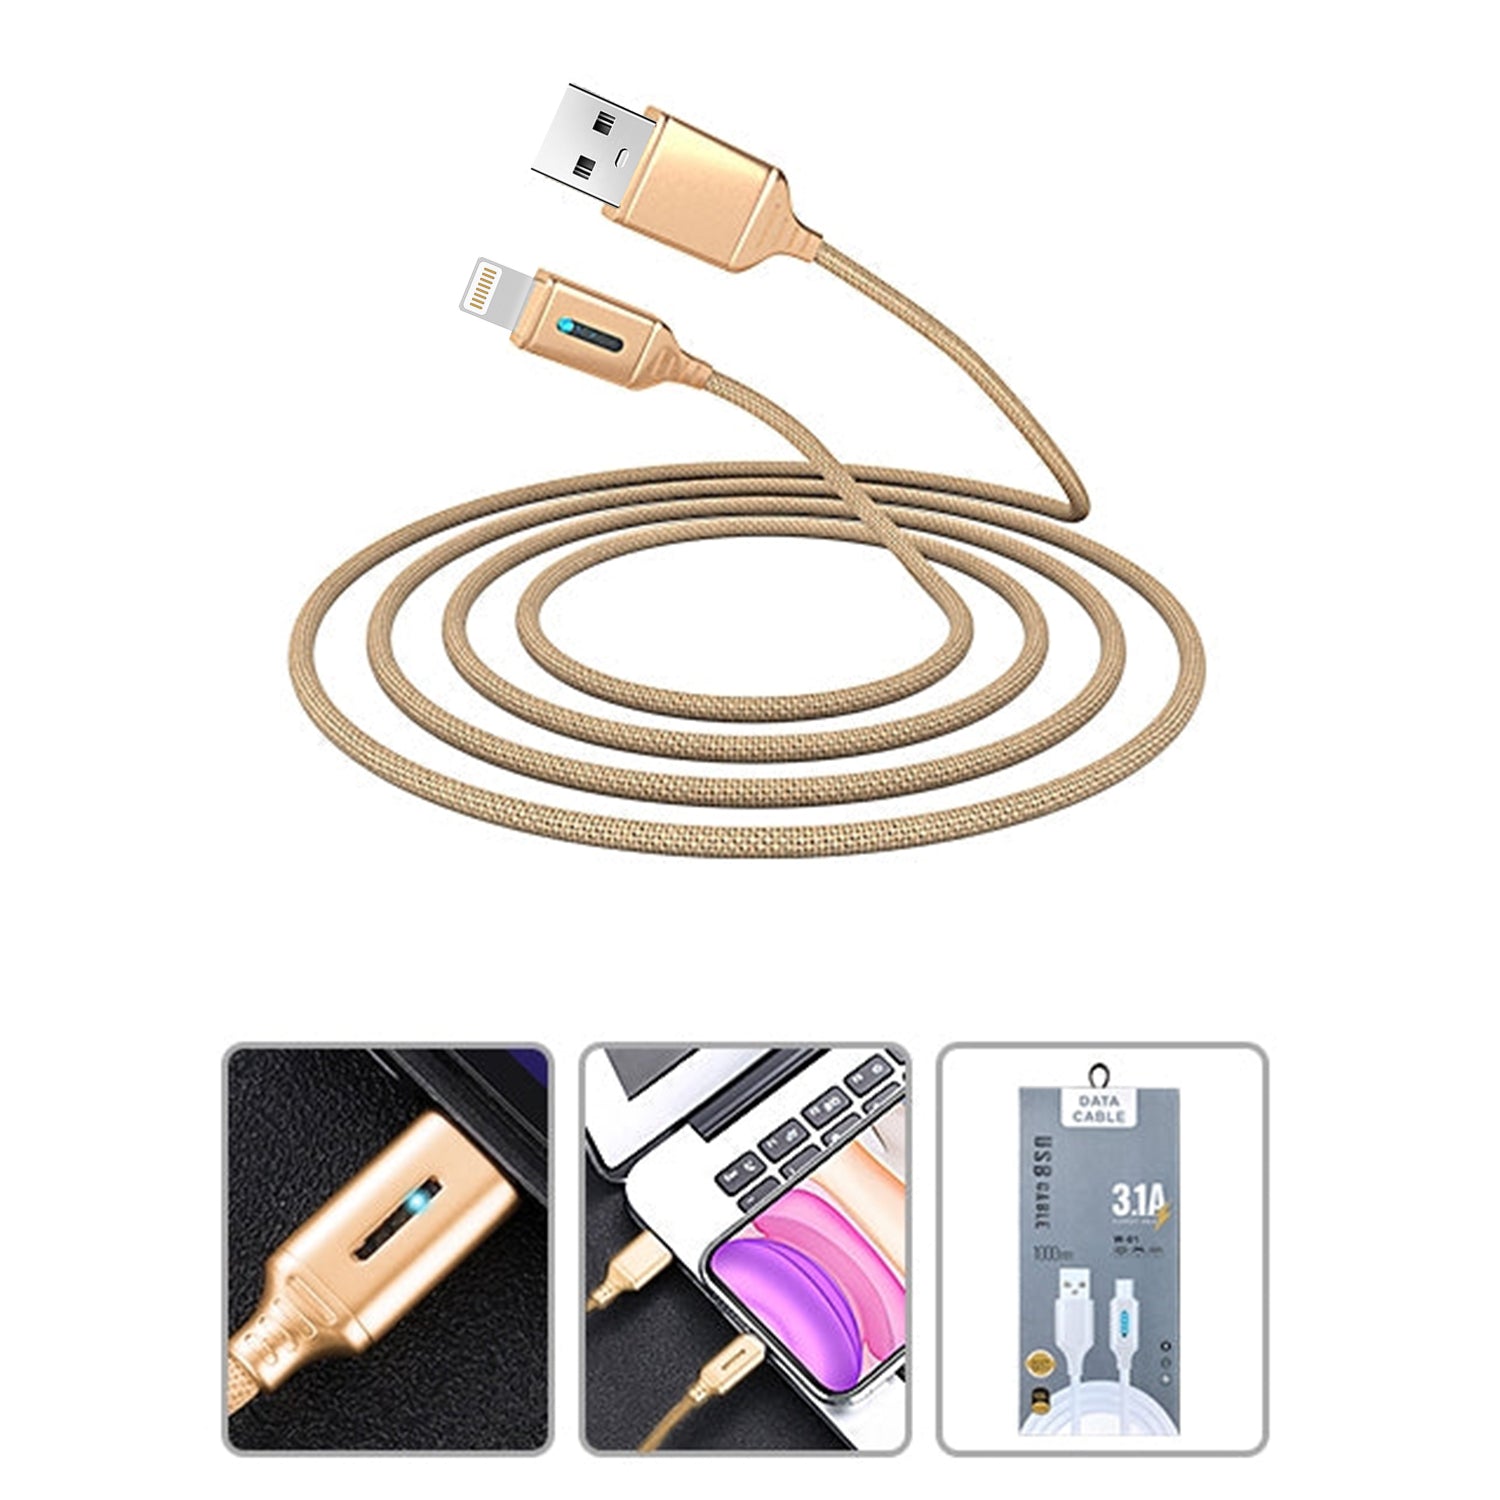 LED Visible Flowing Fast Charging Lightning USB Cable